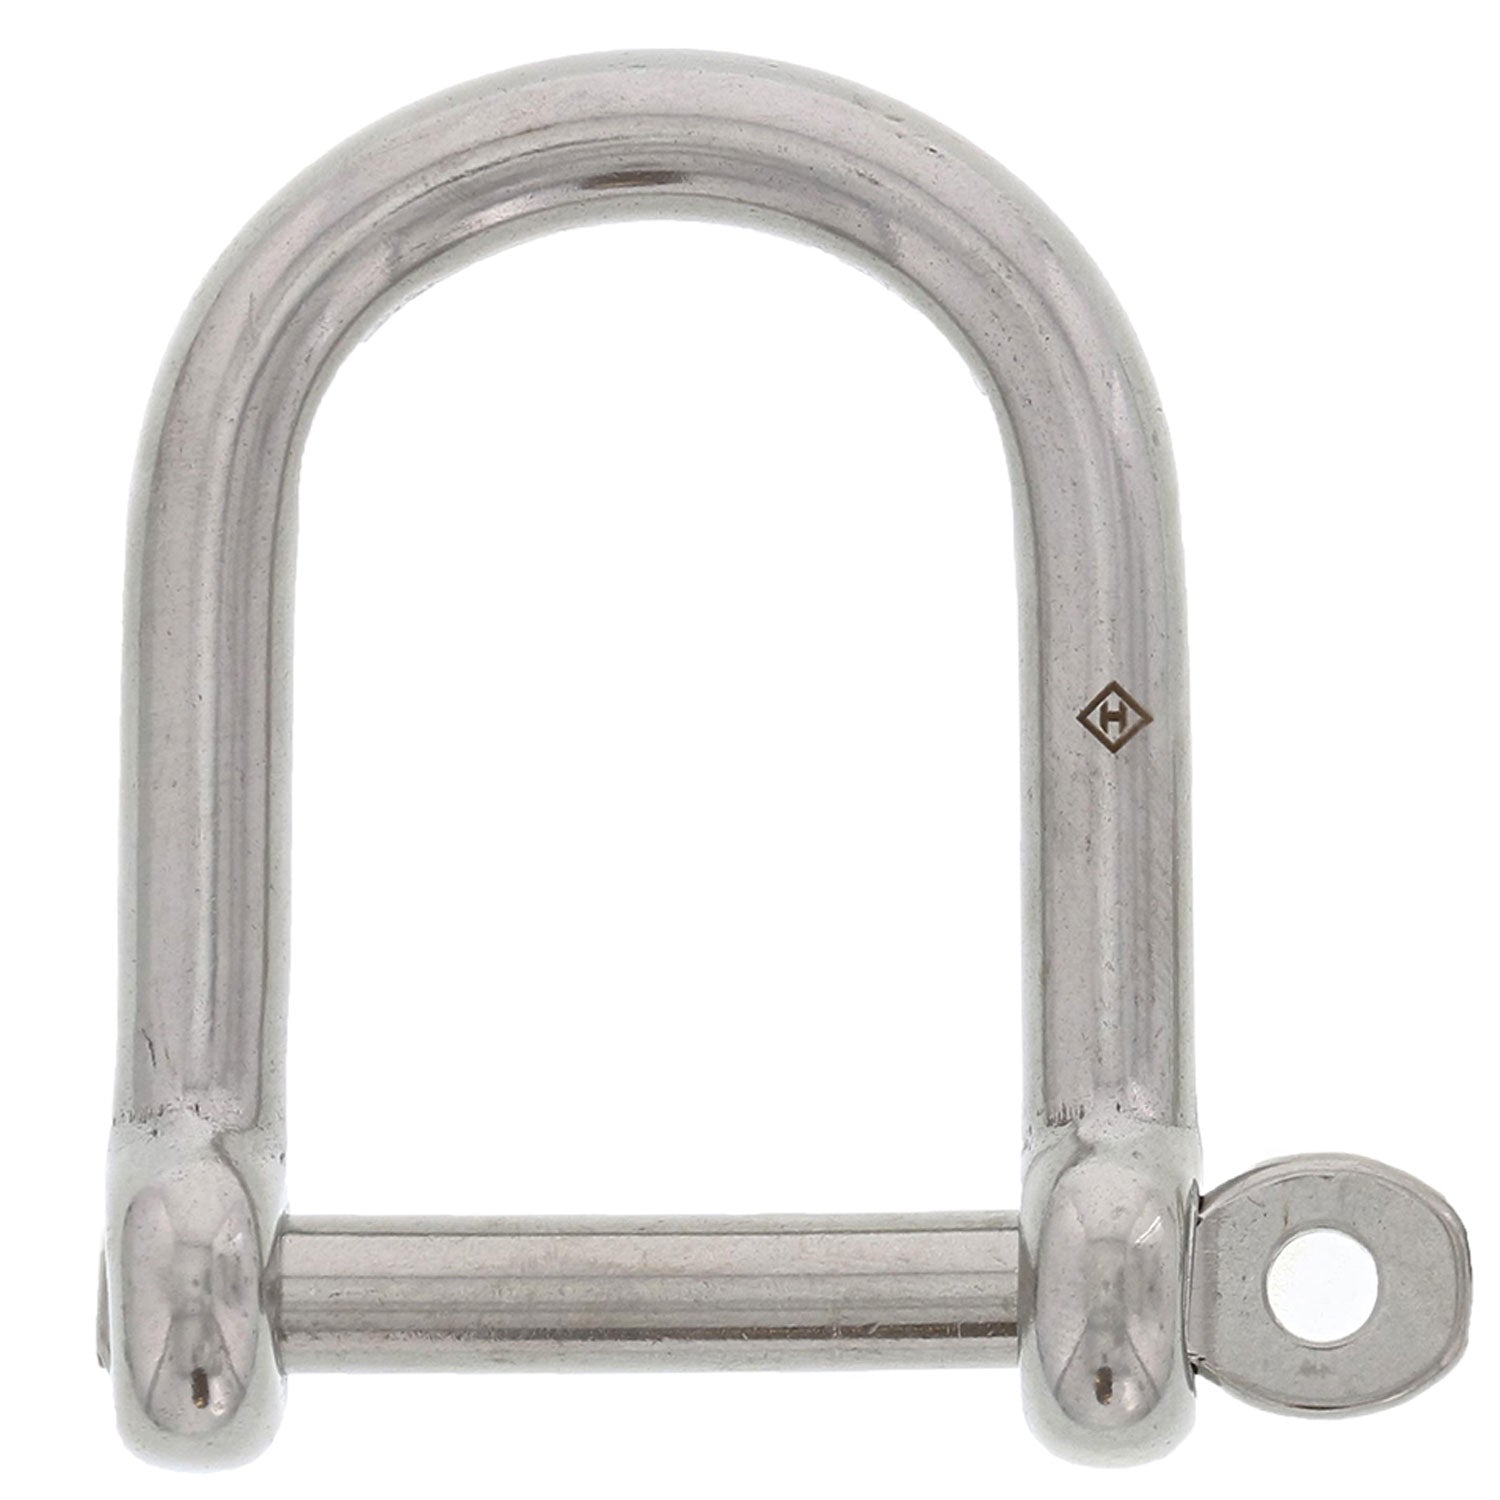 JY-MARINE 1//4 Inch 6mm Screw Pin Anchor Shackle Stainless Steel 316 Heavy Duty Bow Shape Load Clamp for Chains Wire Rope Lifting Paracord Outdoor Camping Survival Rope Bracelets,4 Pieces